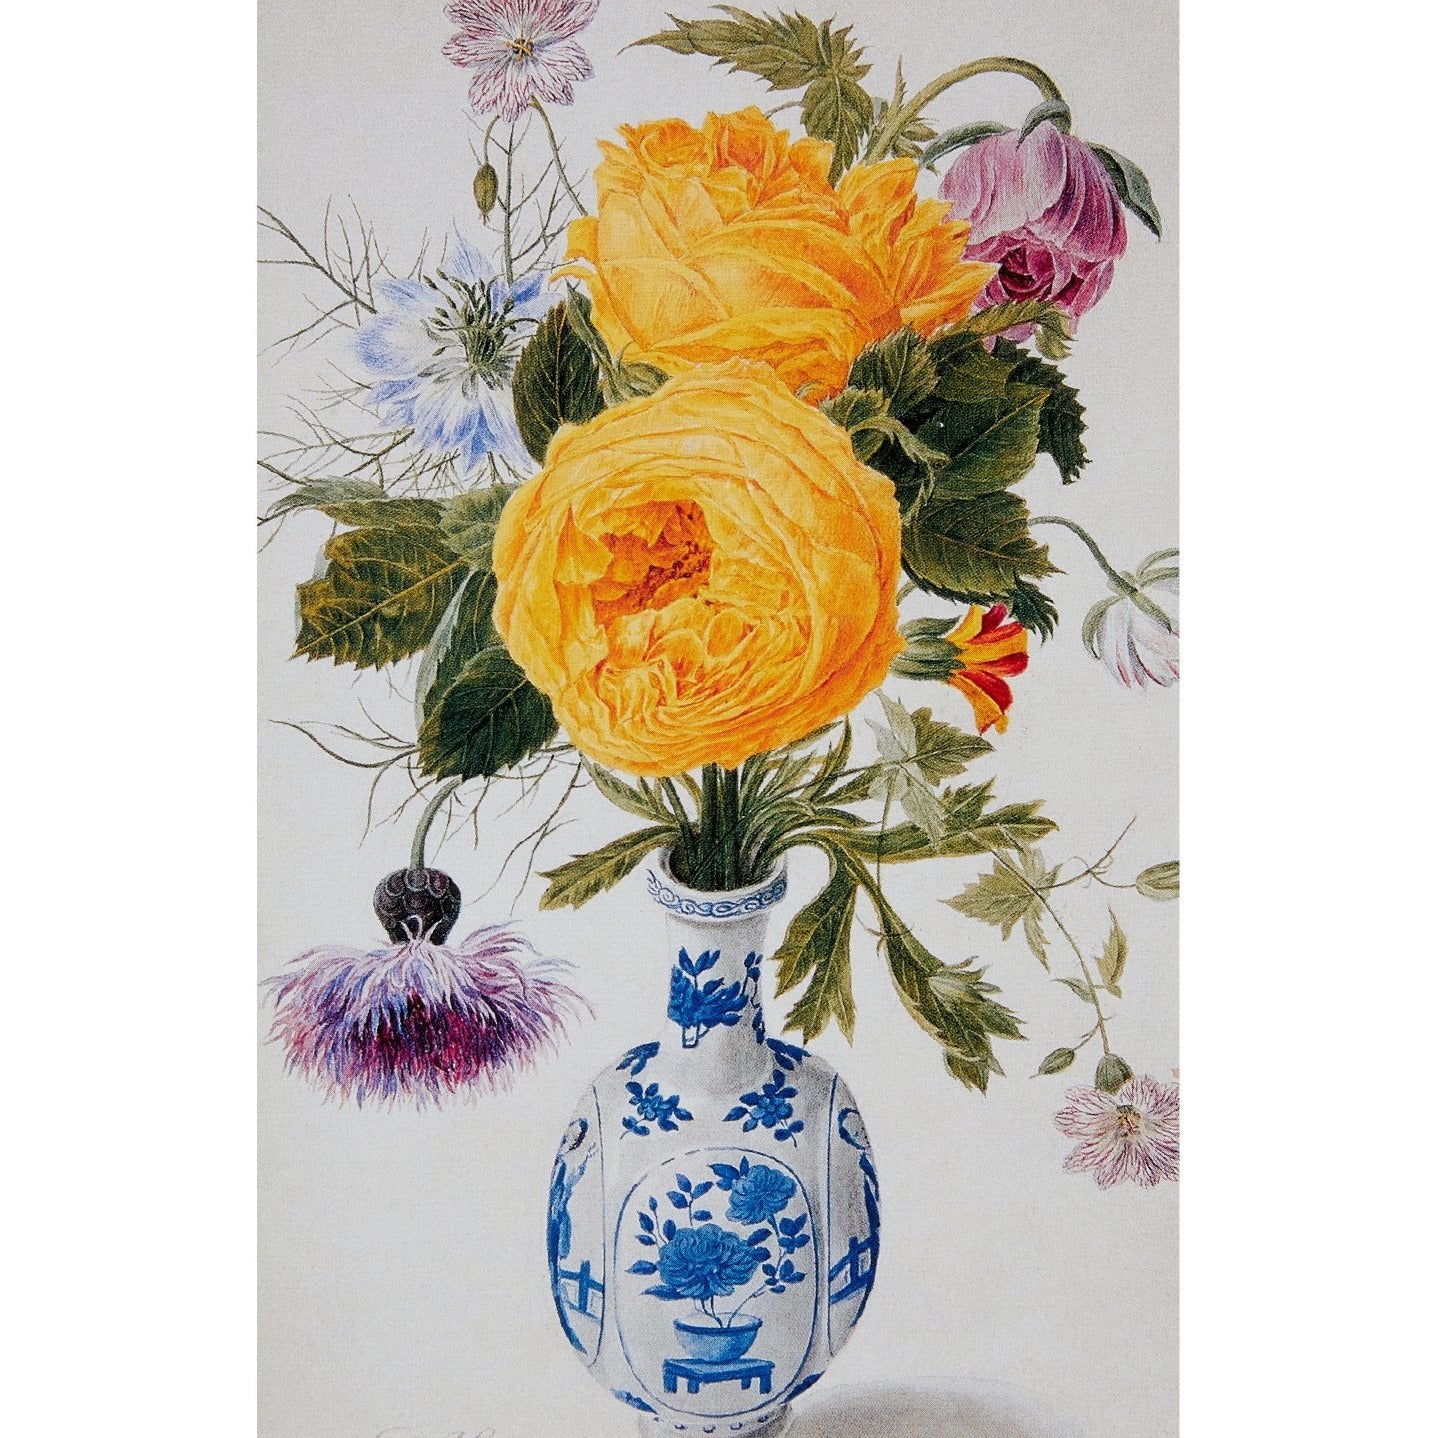 Mixed flowers in a Chinese vase, by Michael van Huysum. From the Broughton Collection of The Fitzwilliam Museum, brought to you by CuratingCambridge.co.uk